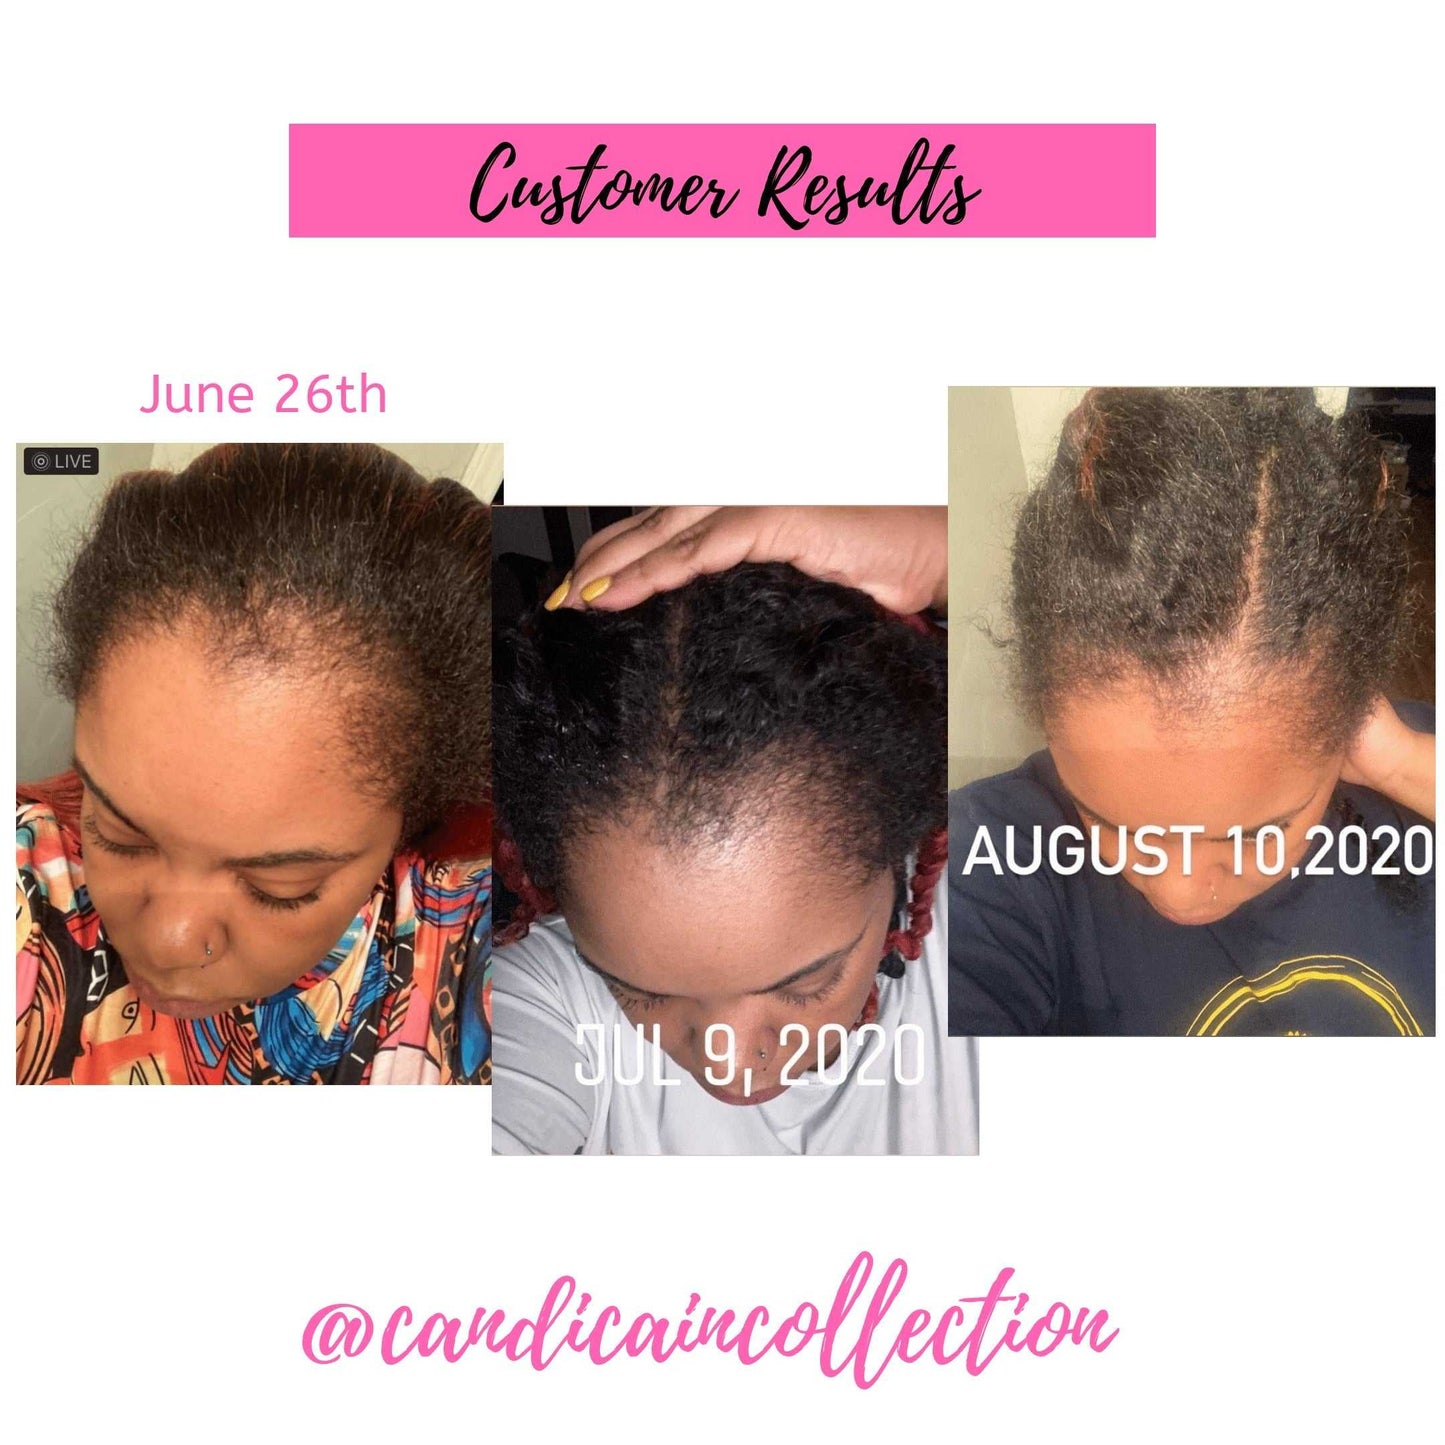 Queen Bea Hair Growth Oil Candi Cain Collection